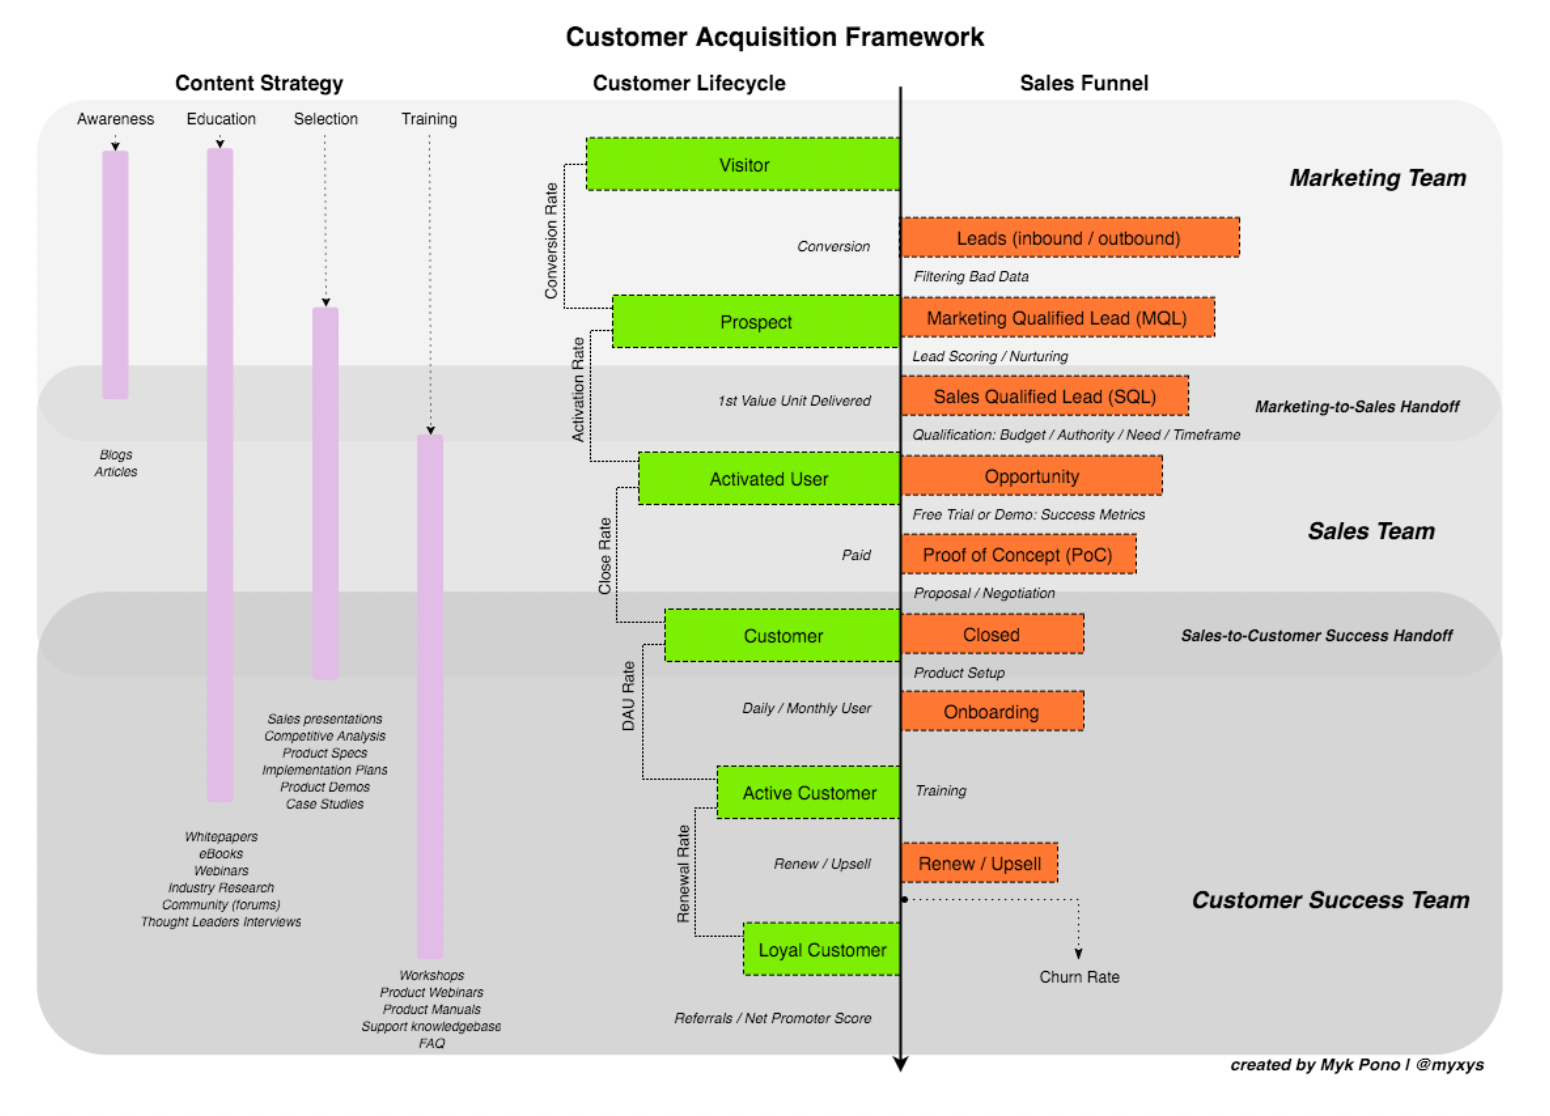 Customer acquisition framework infographic